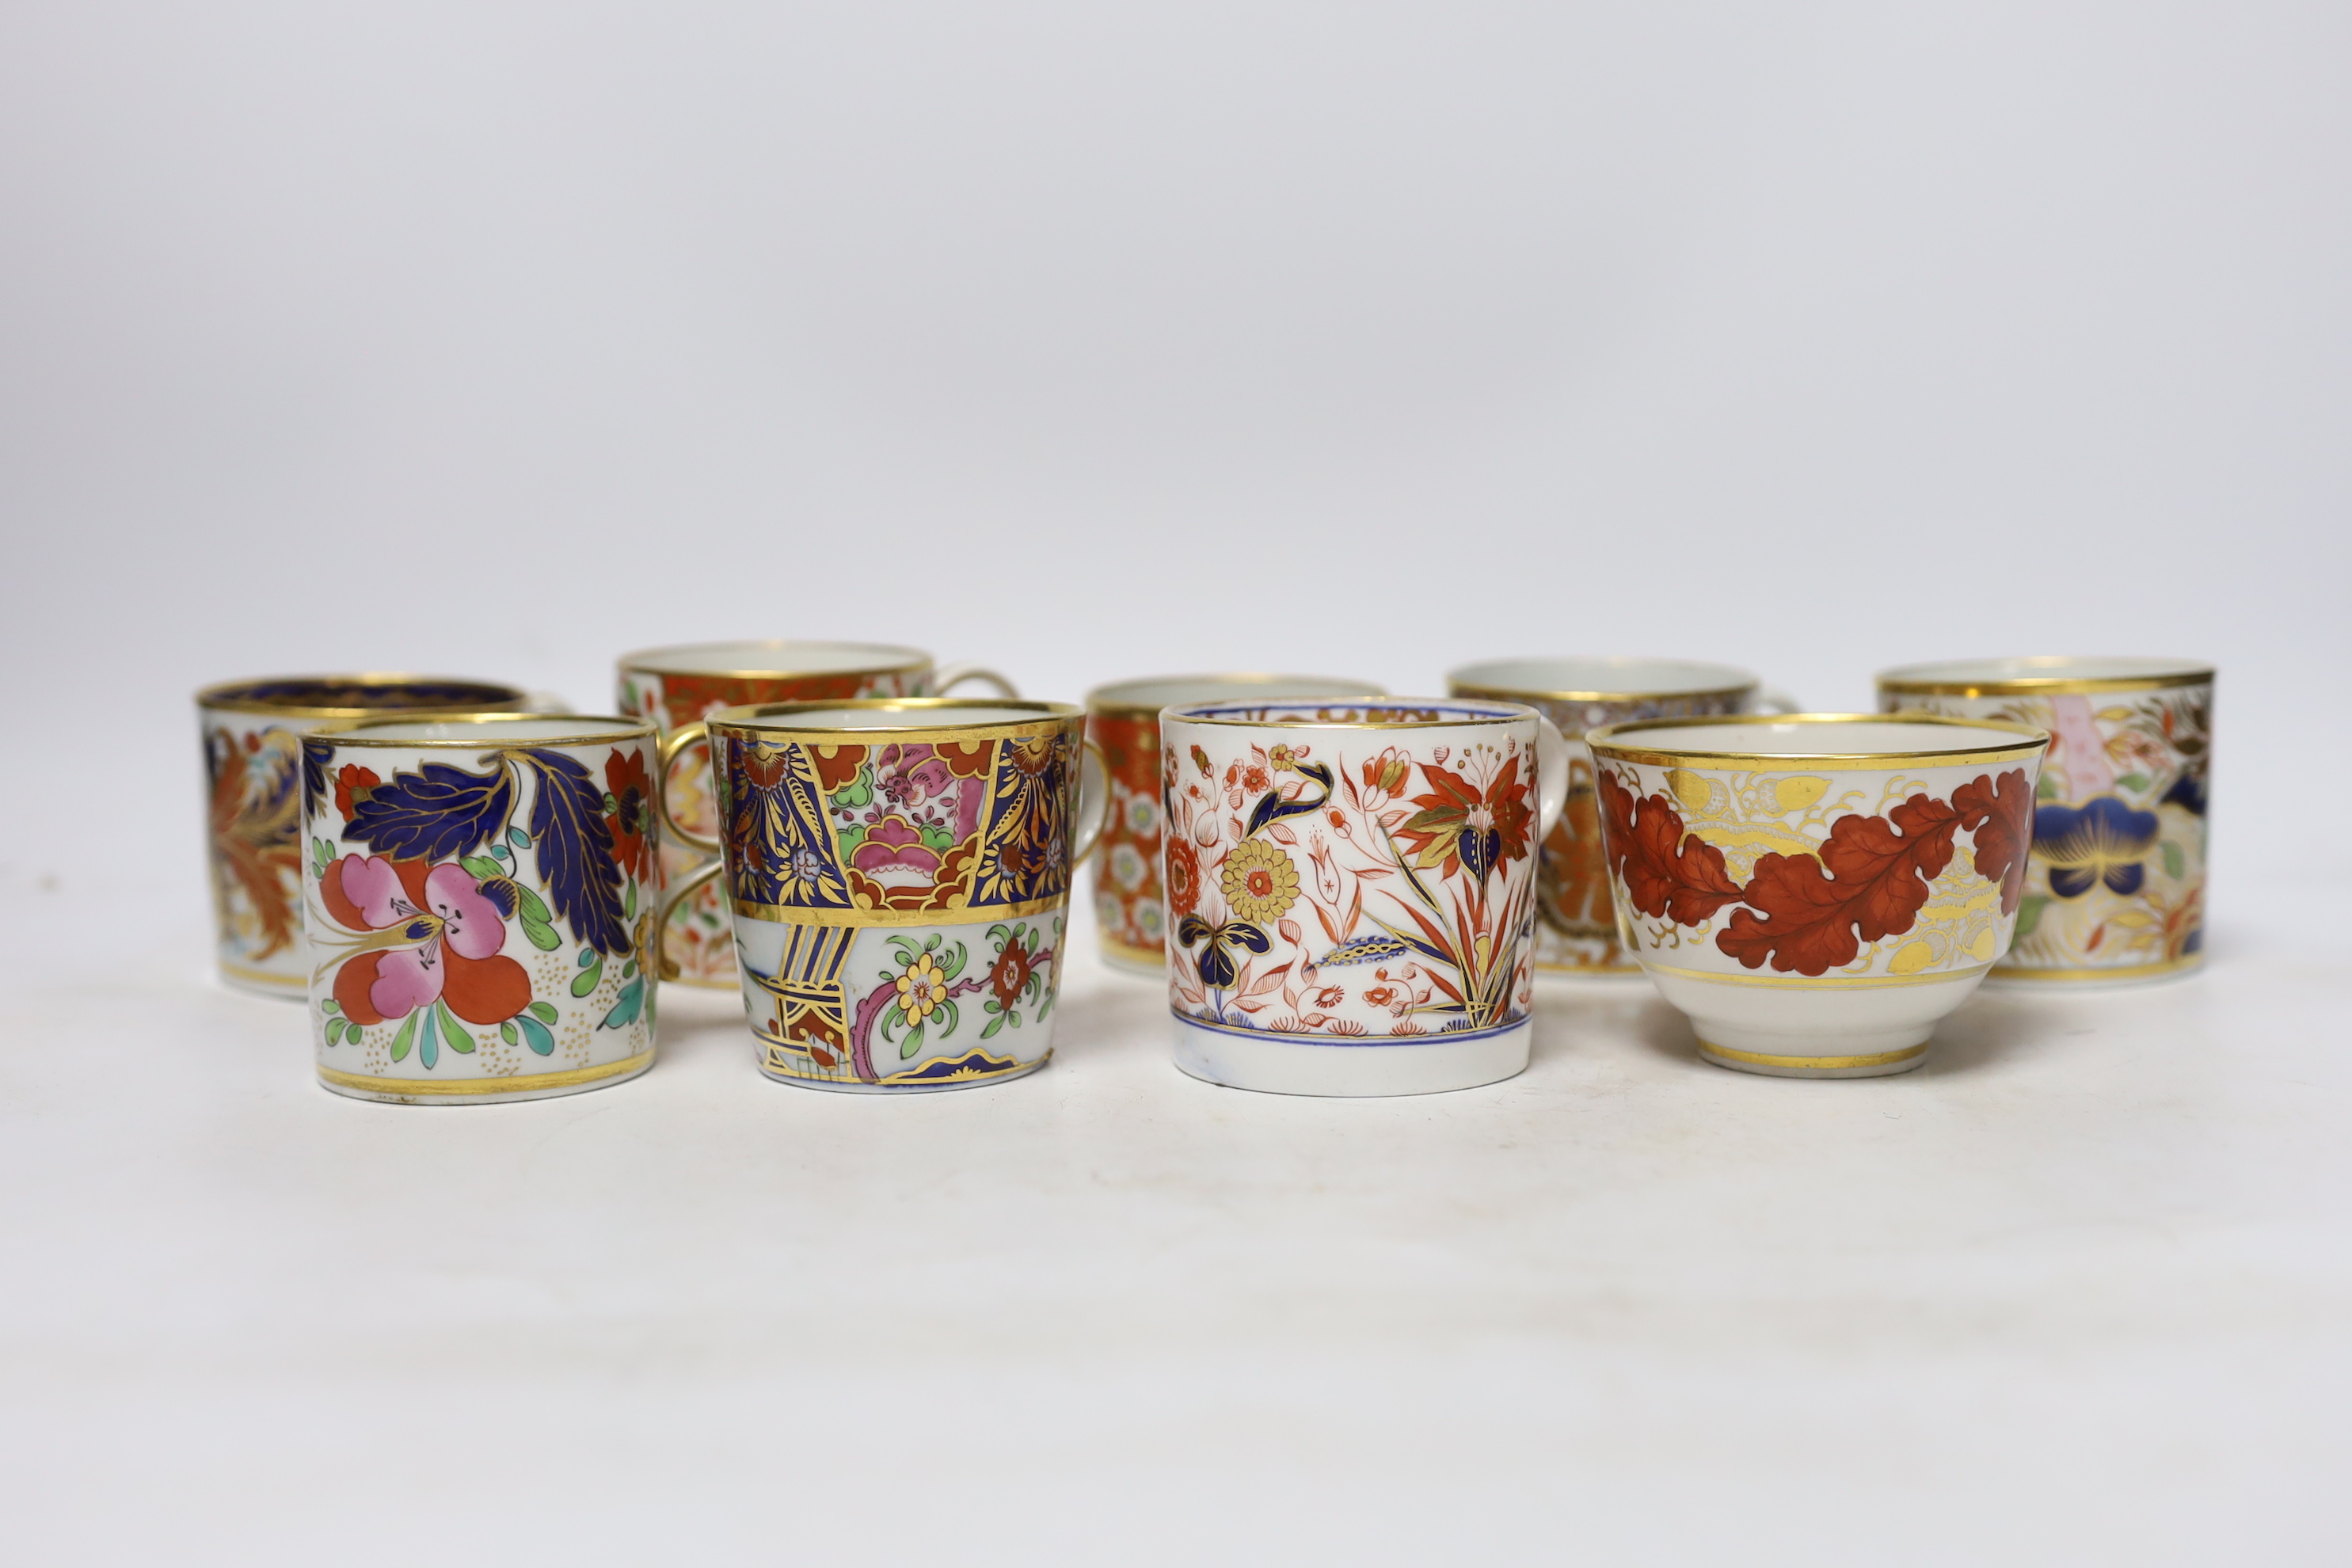 Twelve 1800-1820 English porcelain coffee cans and tea cups, including Imari pattern examples